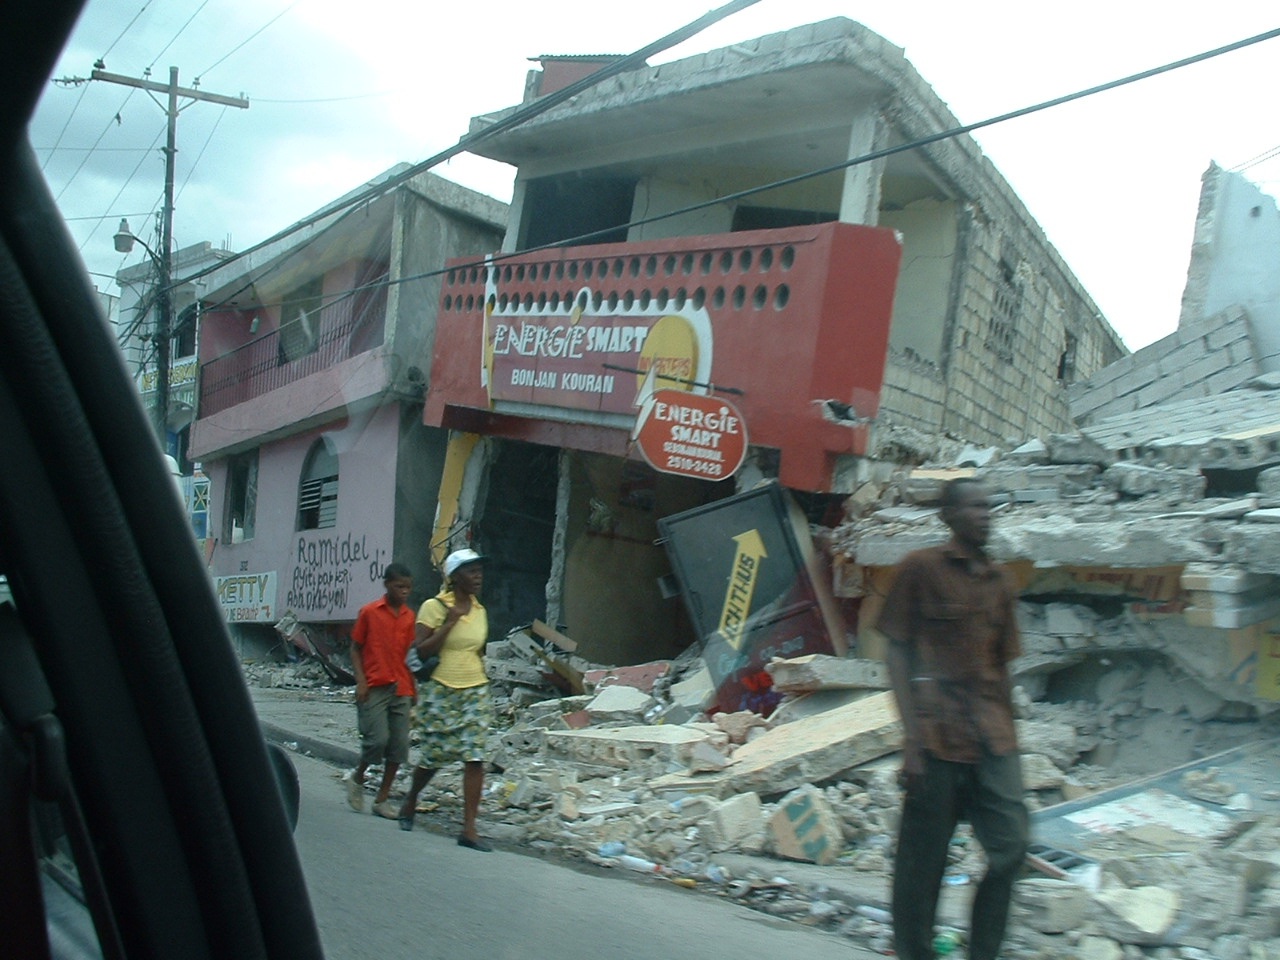 Three people walk down a street with ruined, collapsed buildings in the background